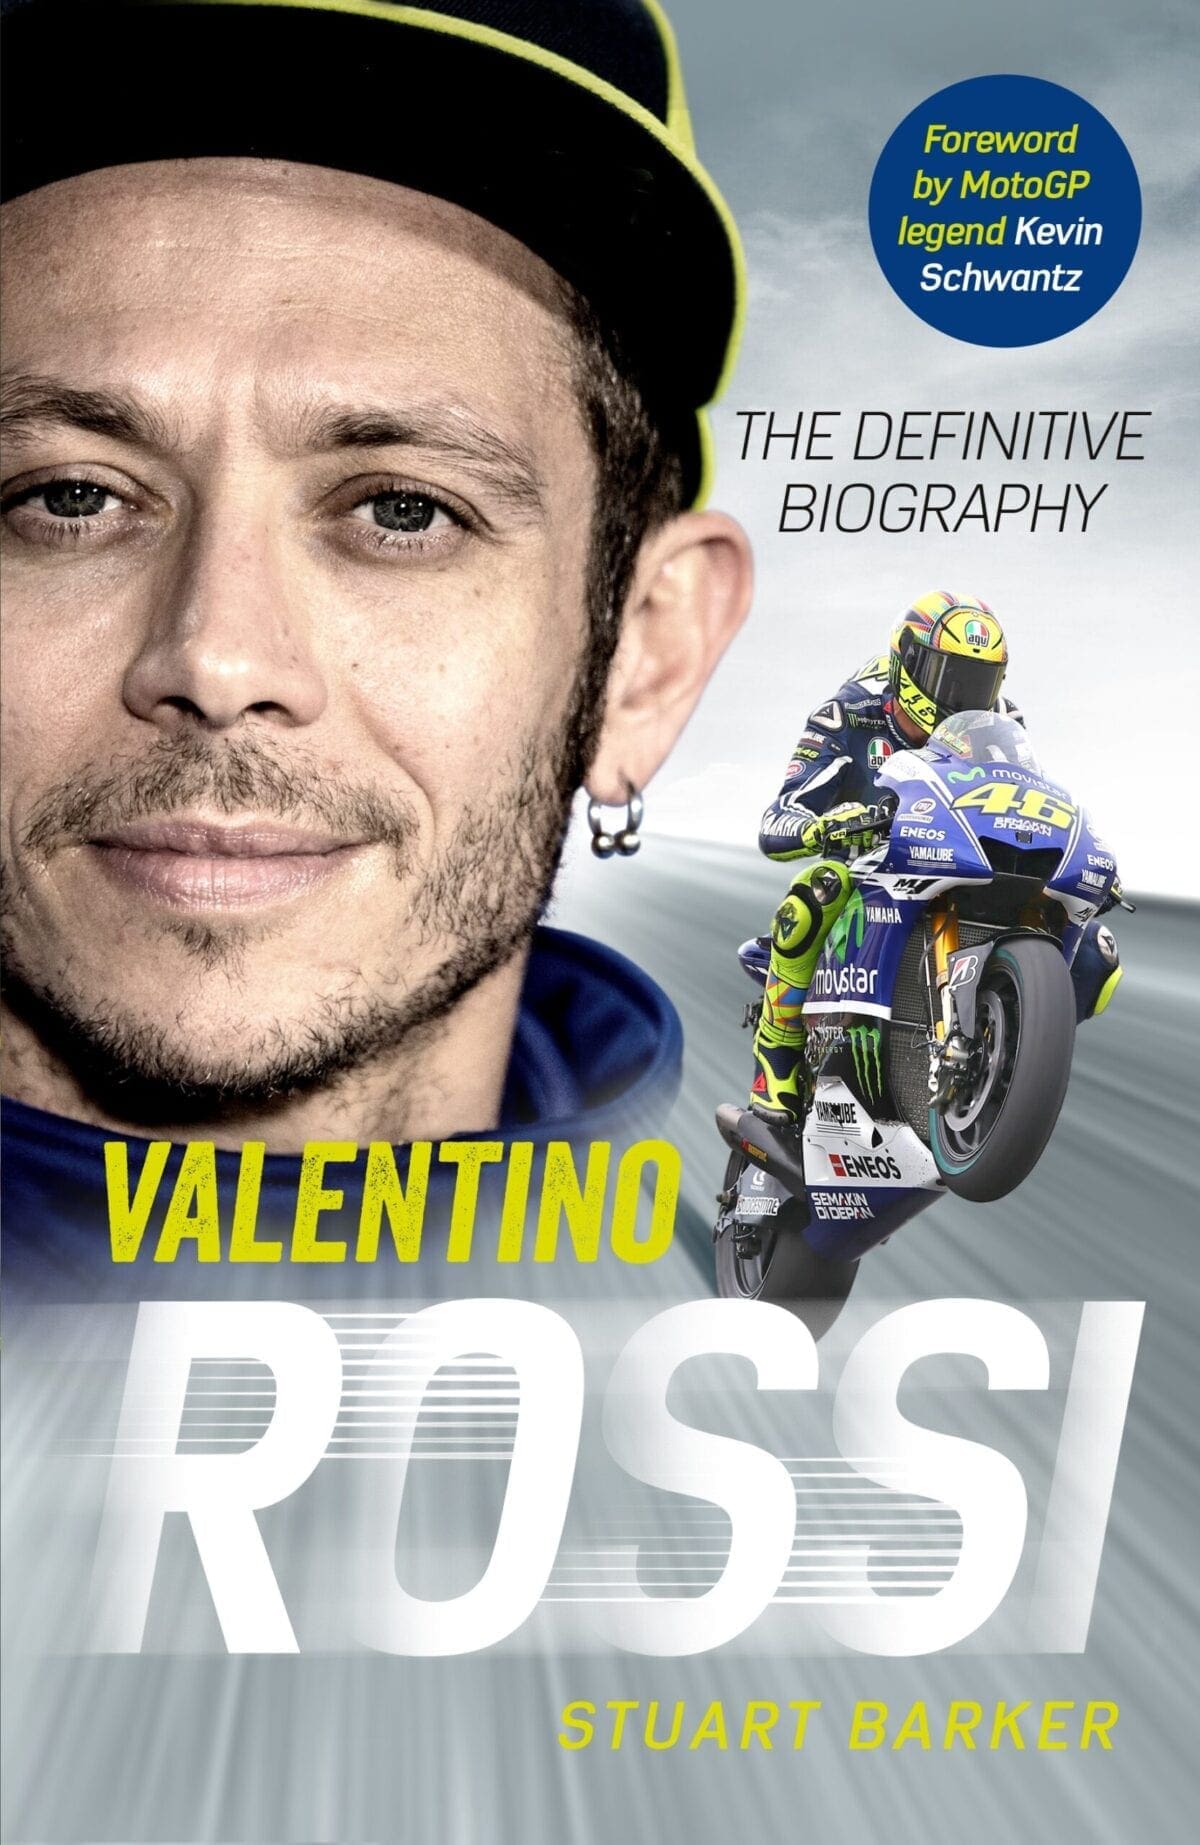 TOP READ: Valentino Rossi – The Definitive Biography